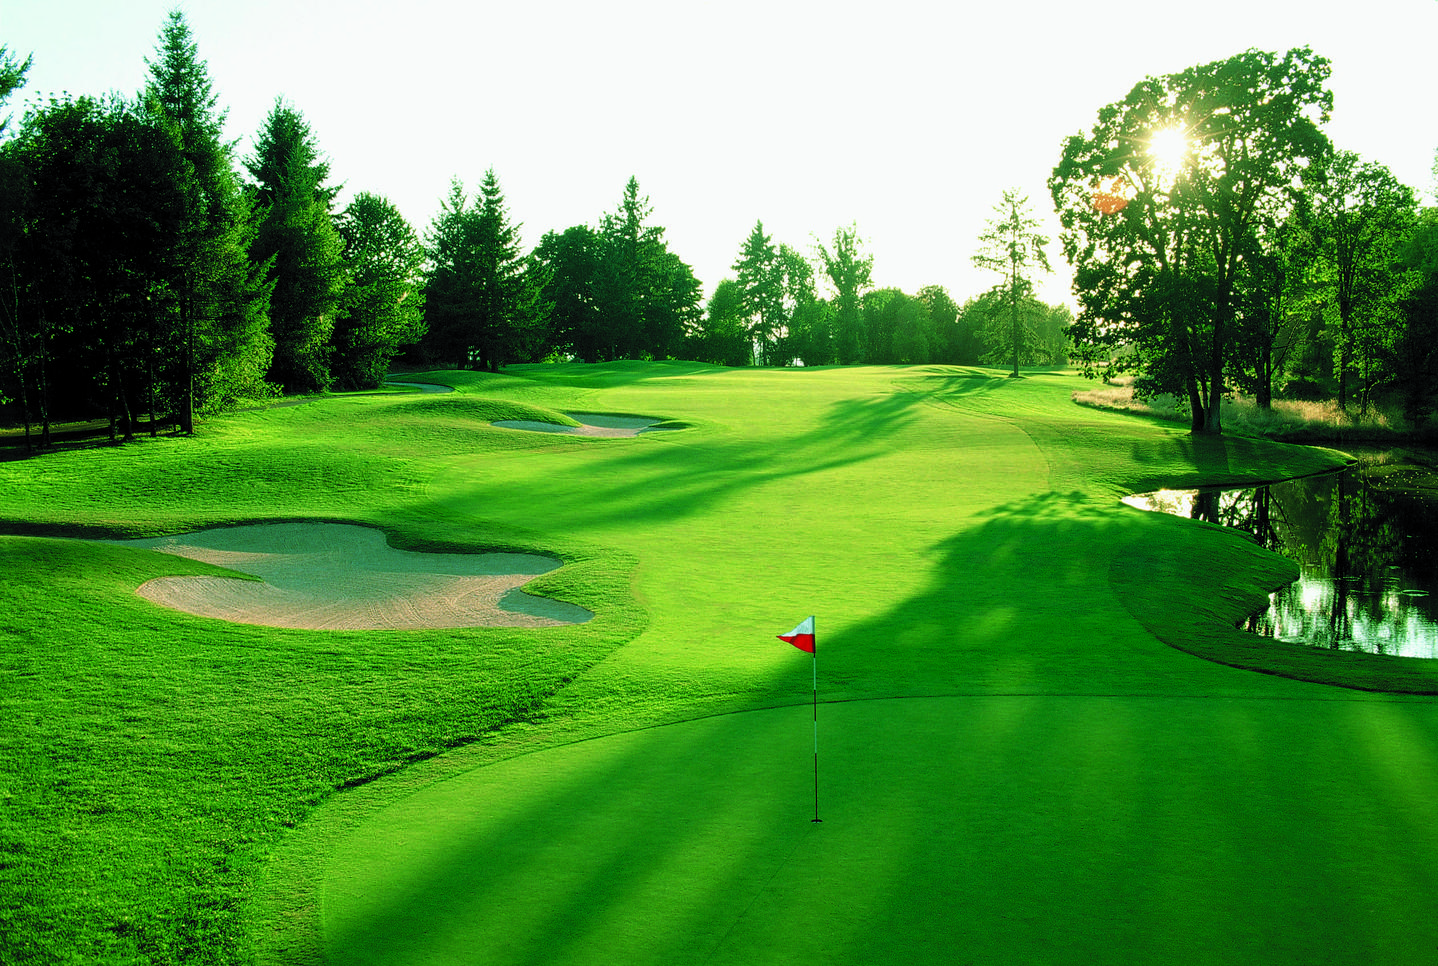 Golf Course Wallpapers - Wallpaper Cave